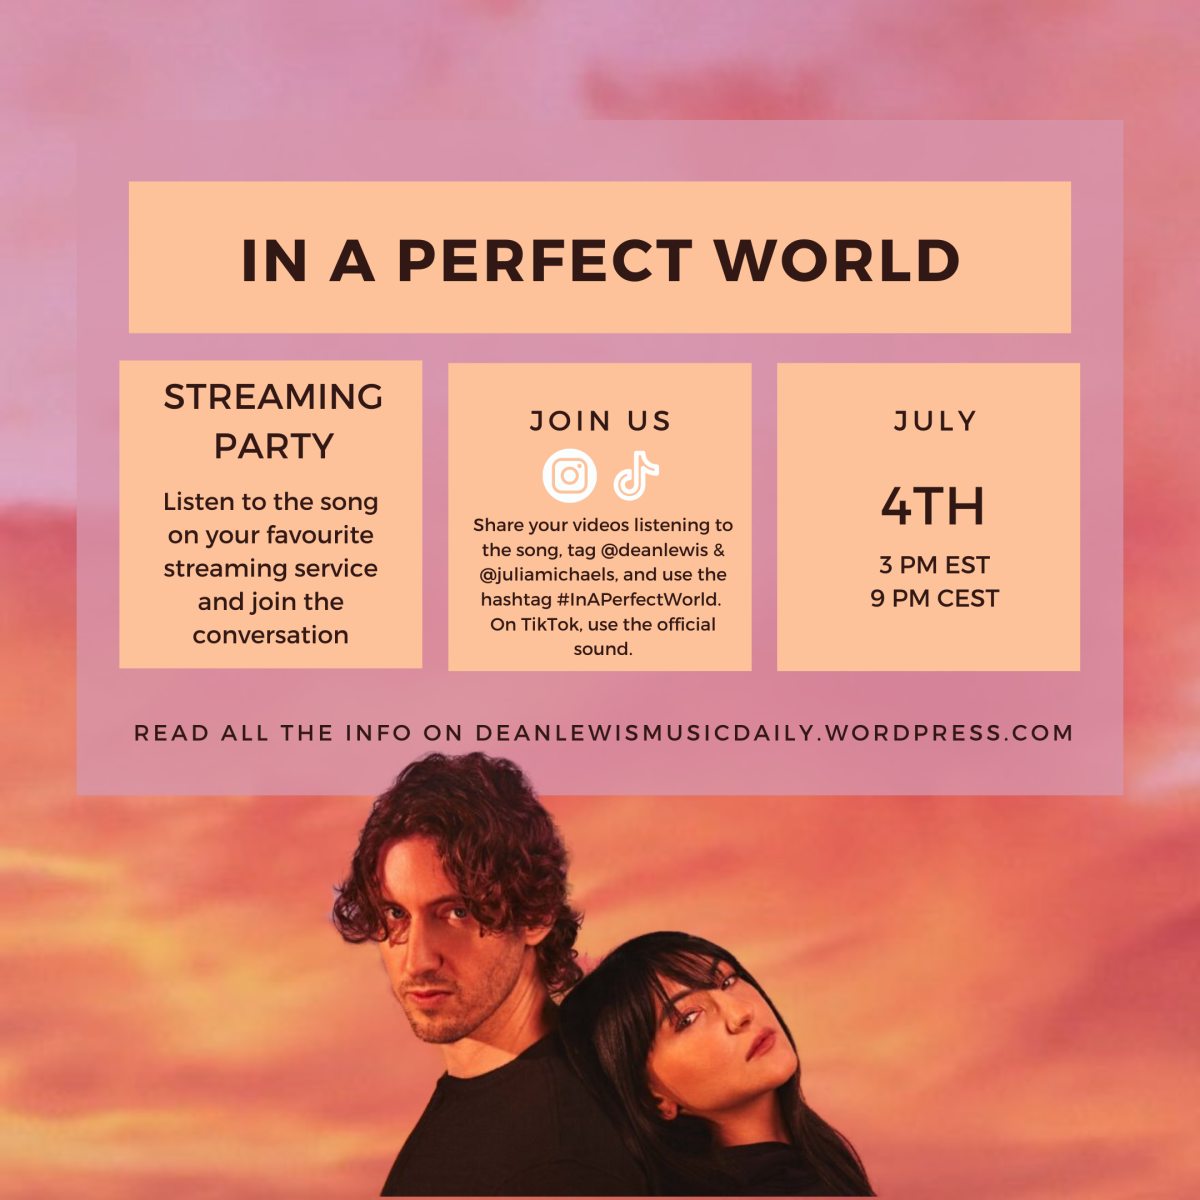 join “in a perfect world” streaming party